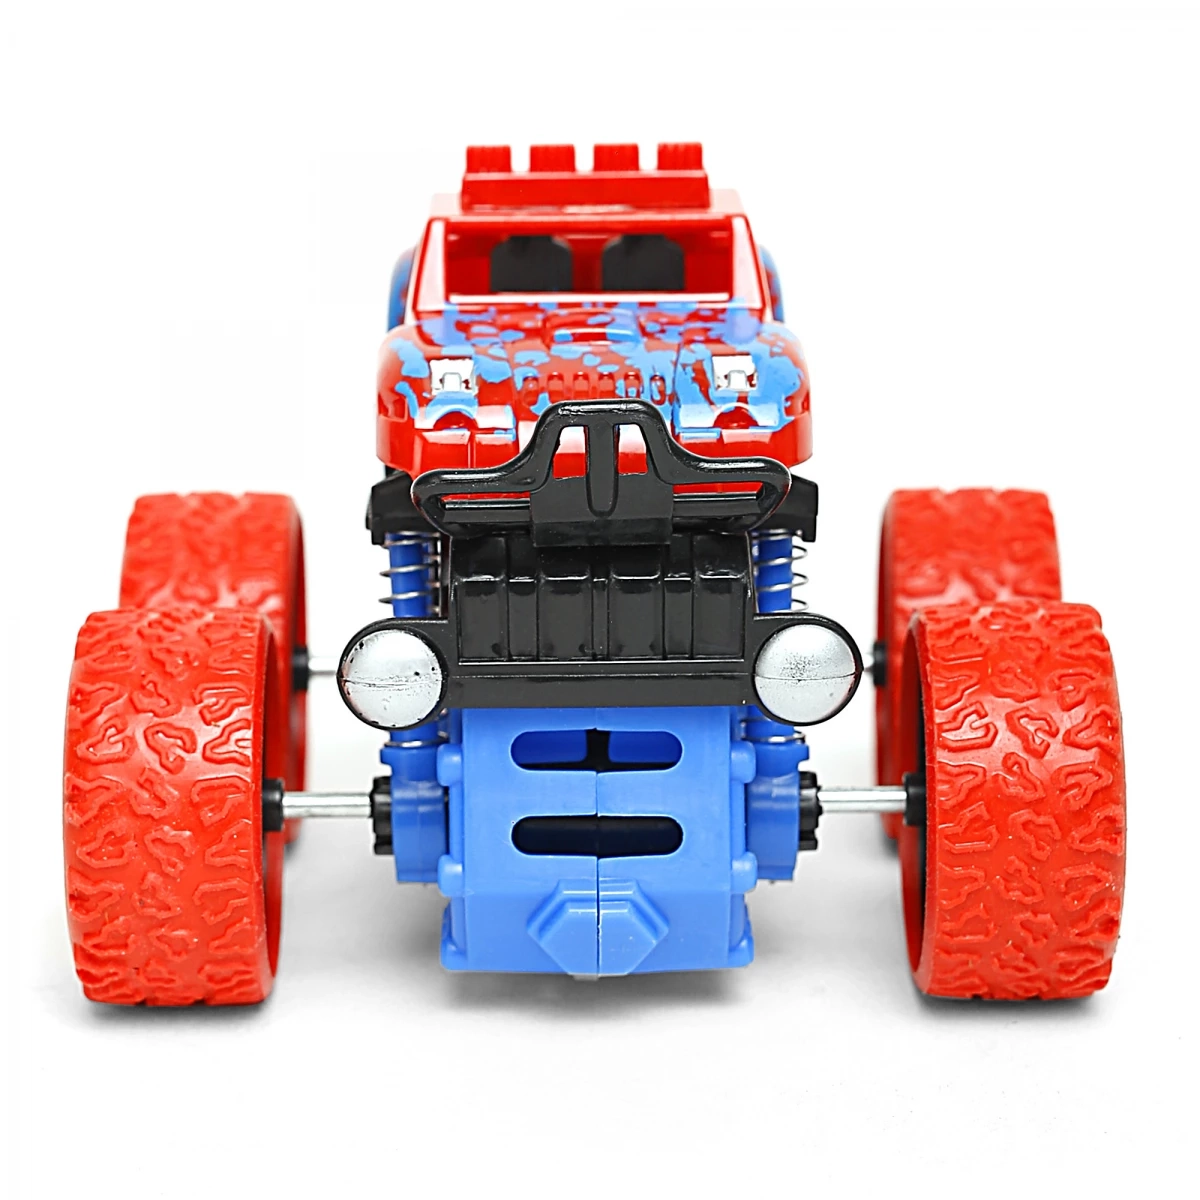 Ralleyz Friction Toy Car With Grip Wheels 4 Wheel Drive Force Amazing Kids Play Mini Toy Car Red 6Y+